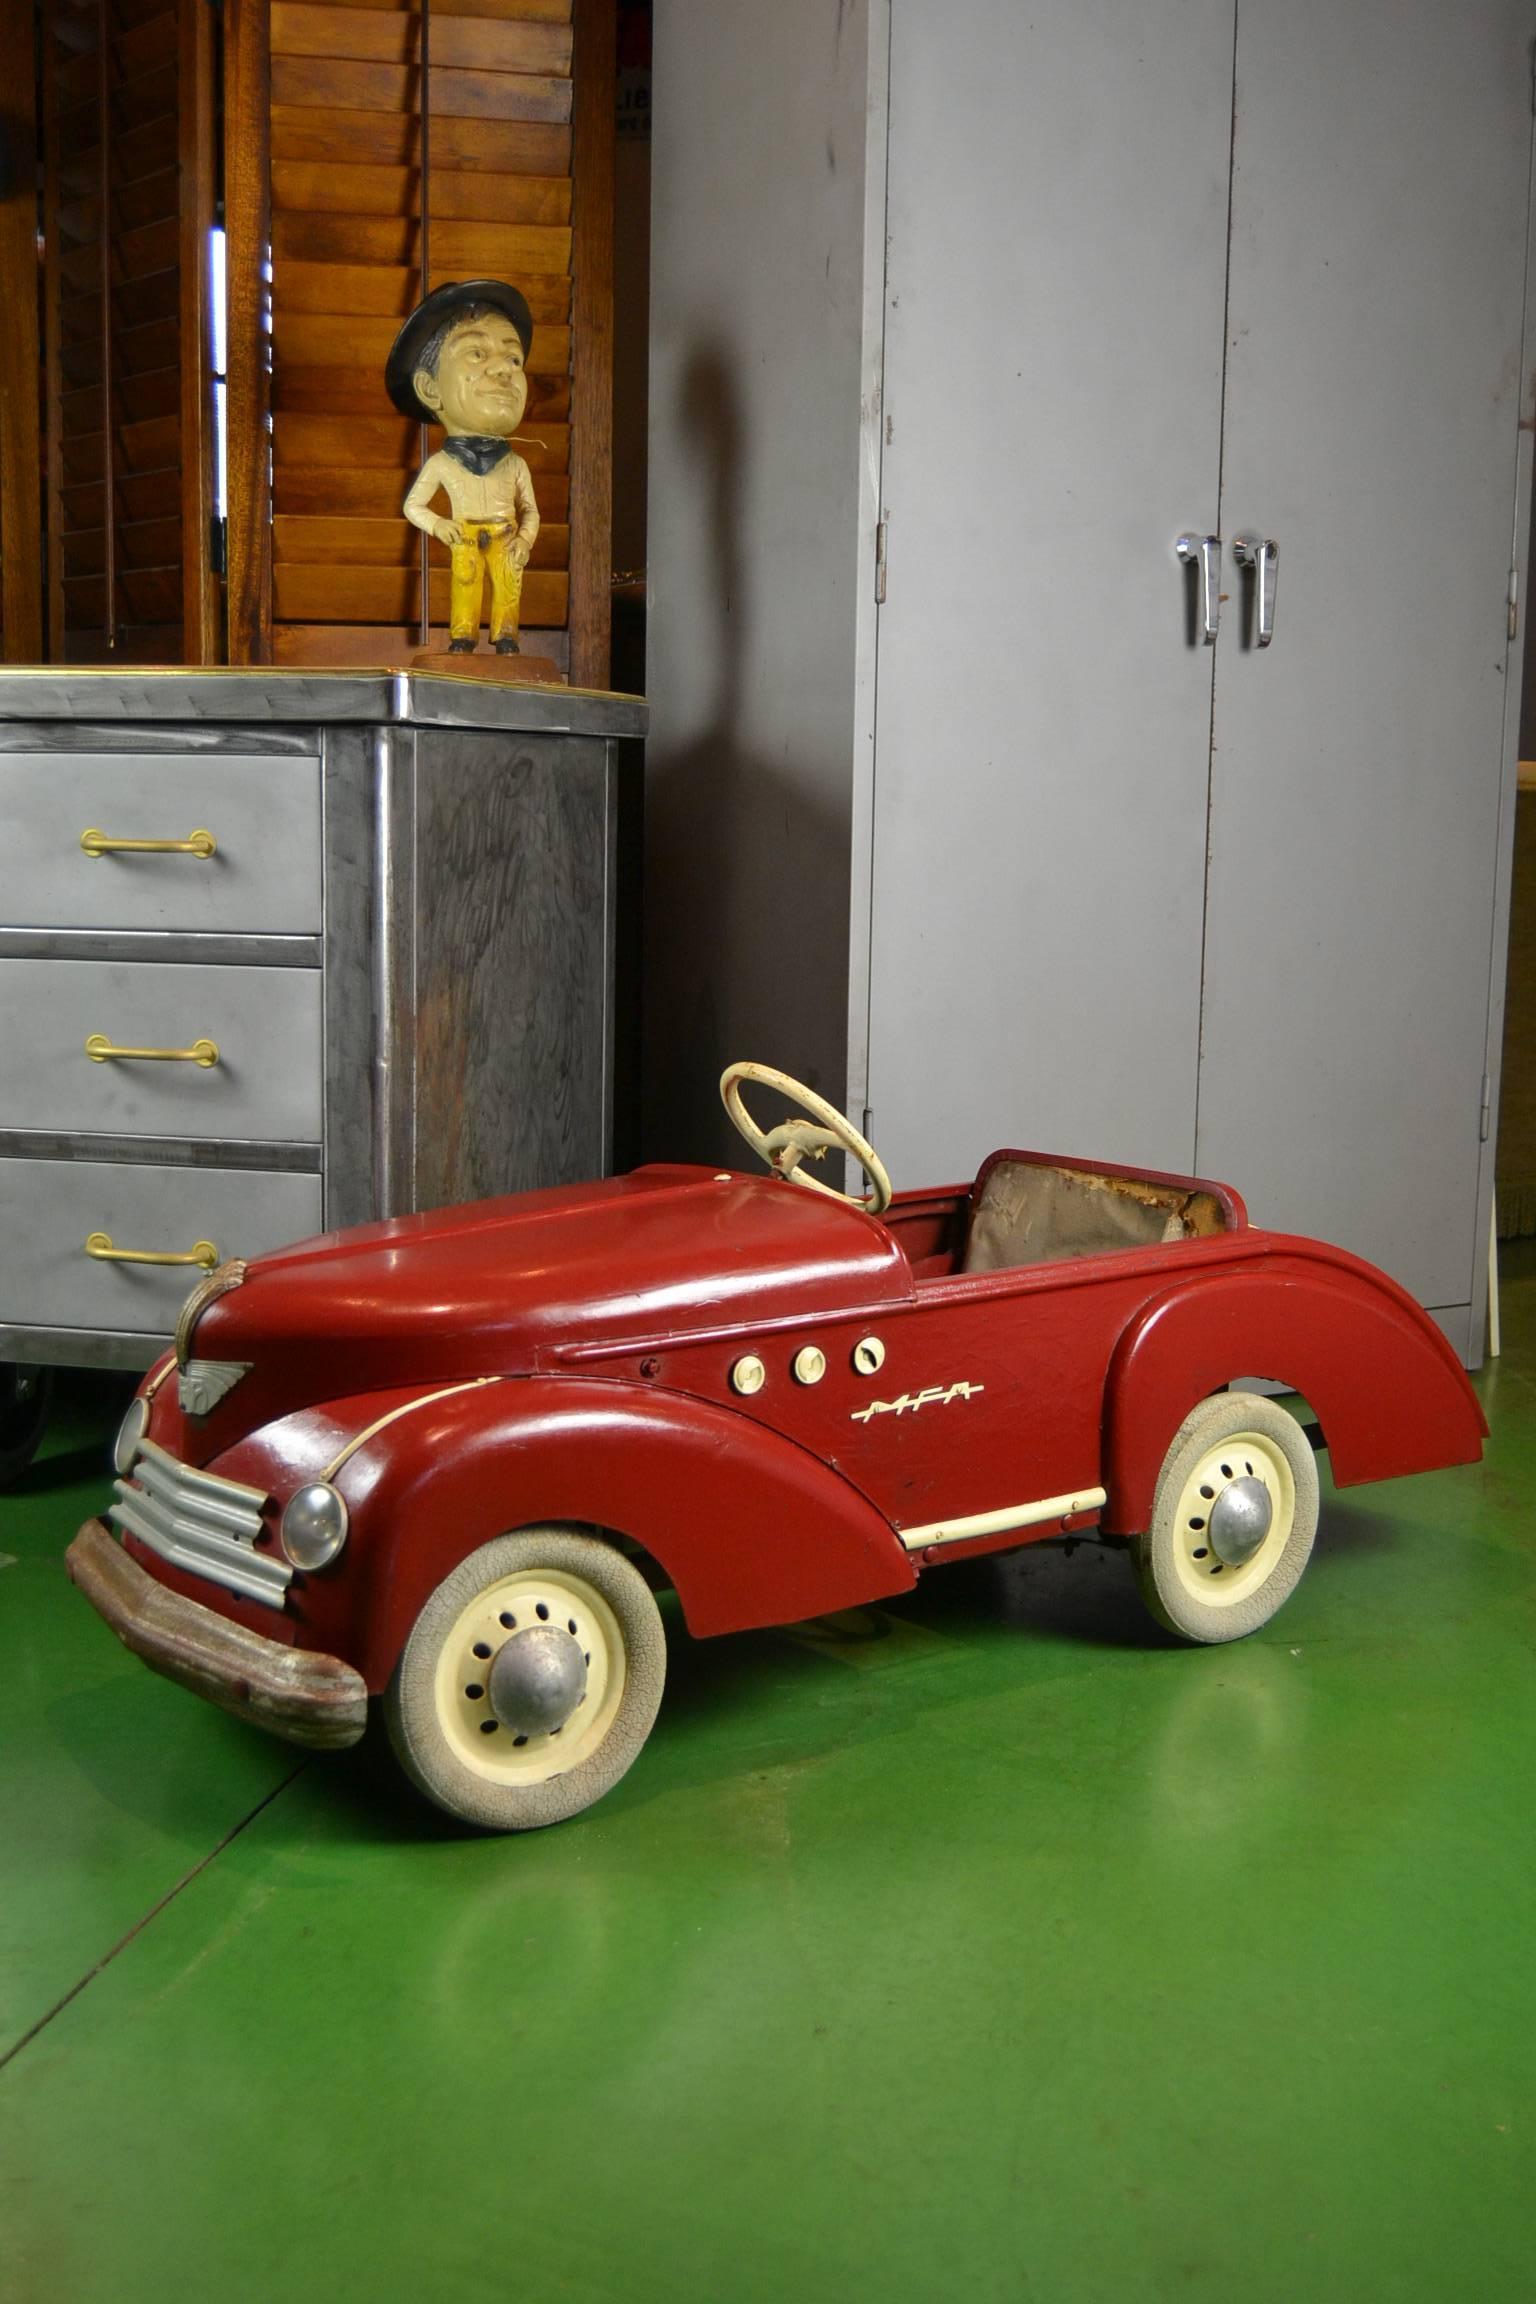 Stunning big vintage child's pedal car from the fifties.
Type: Peugeot 203.
Made by MFA France, 1953.
Material: Sturdy metal - full rubber tires.

